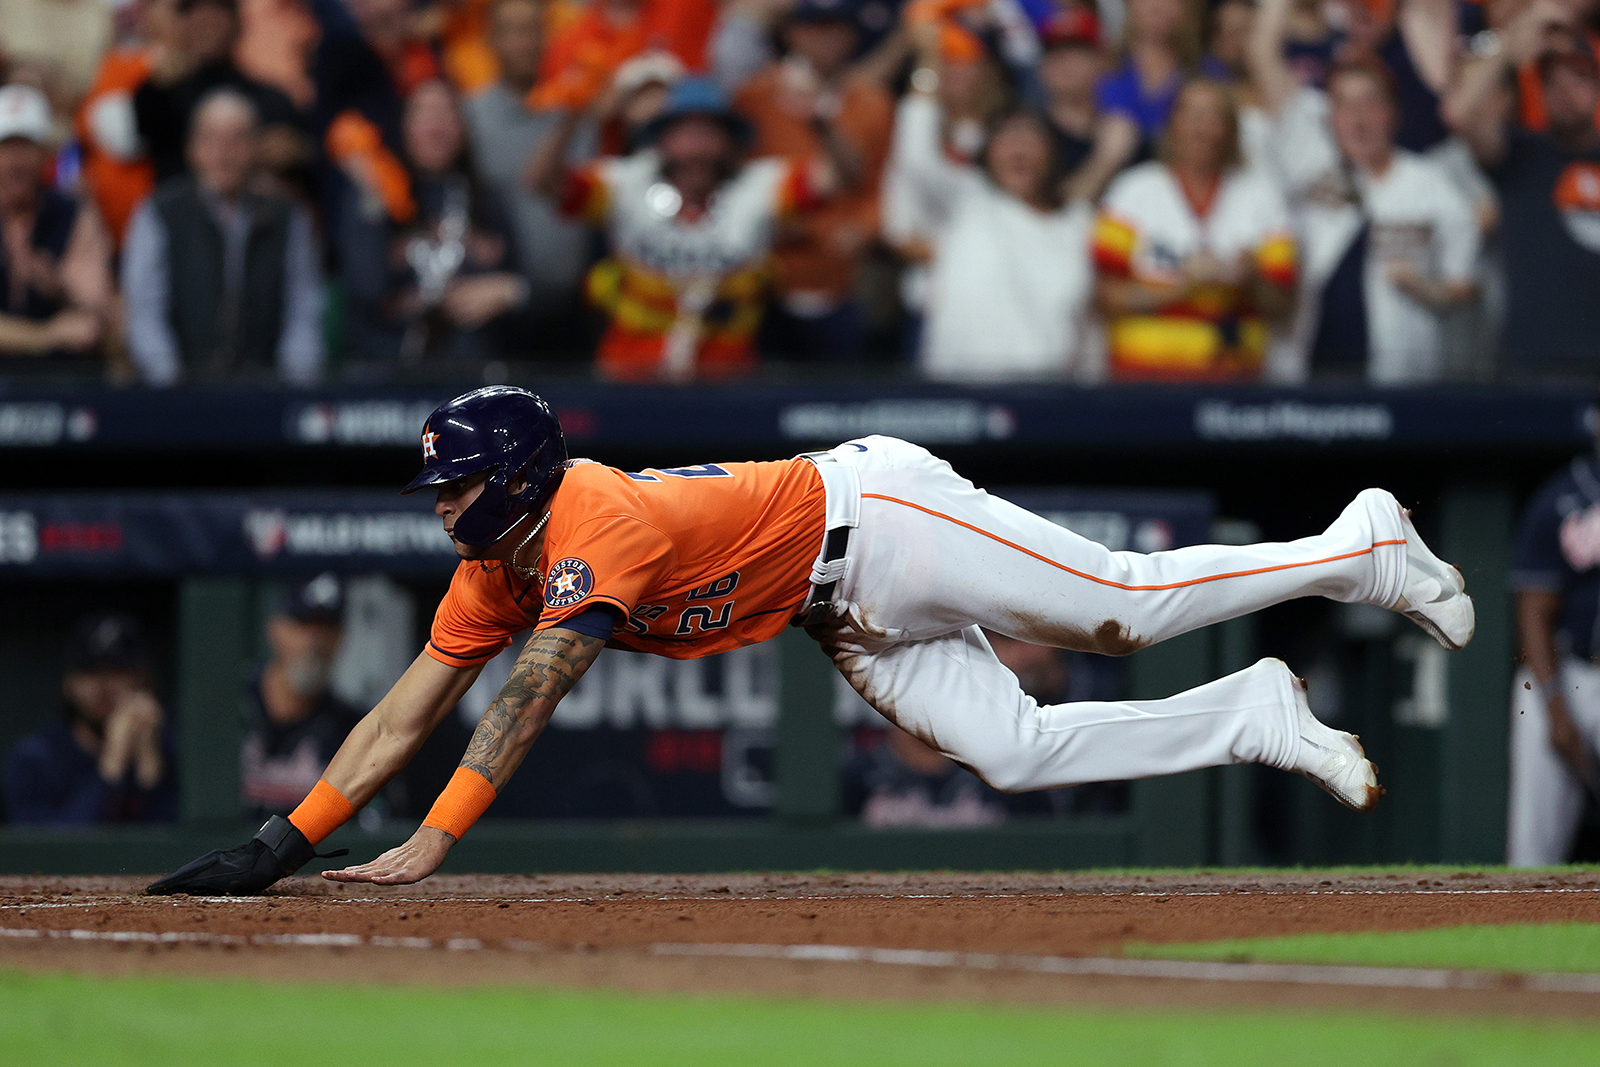 Jose Siri of the Houston Astros slides in safely at home plate to score a run against the Atlanta Braves during the second inning.